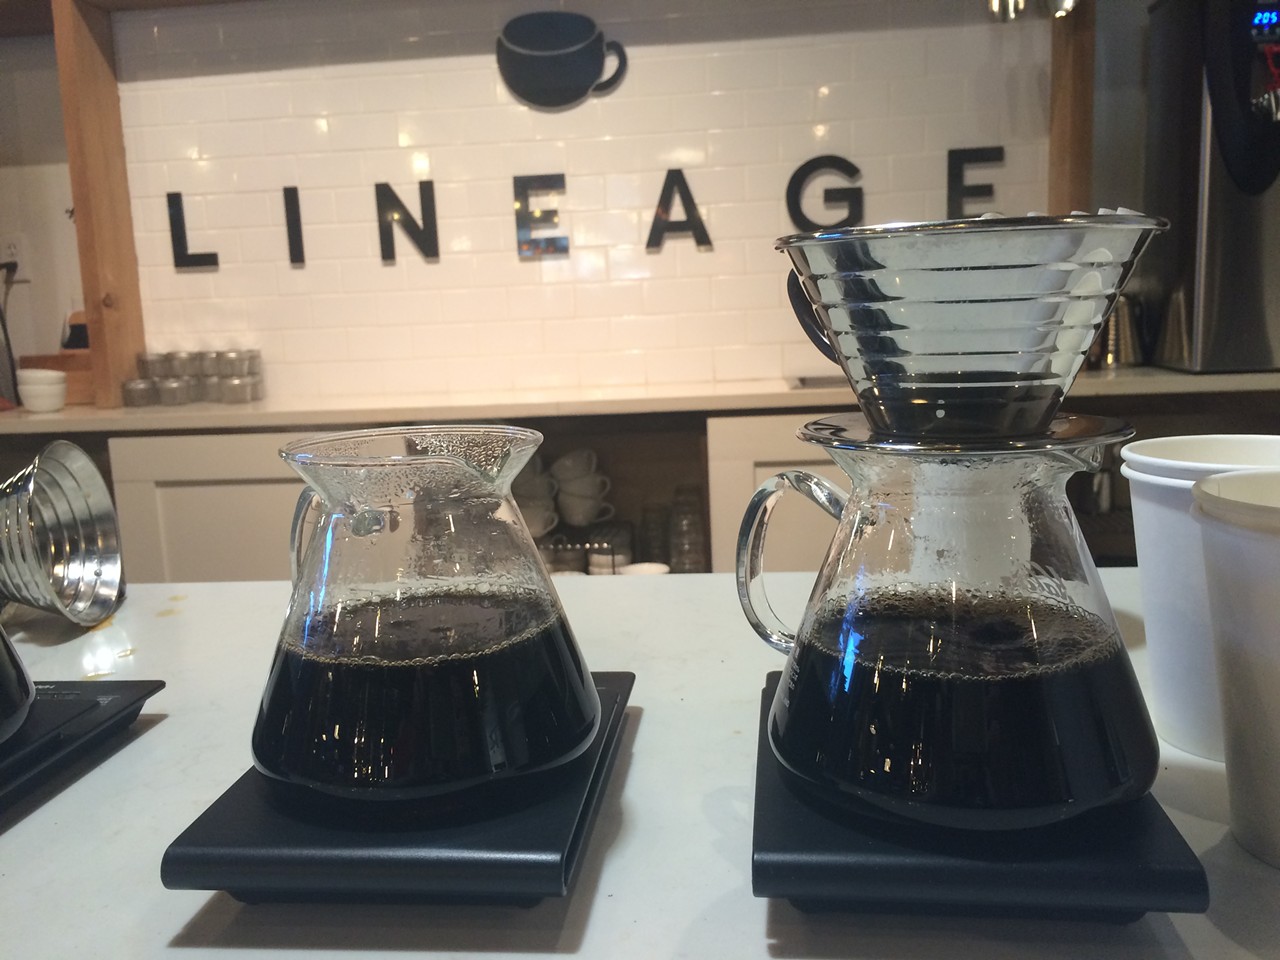 Waiting for pour-over brew at Lineage. Worth the wait.